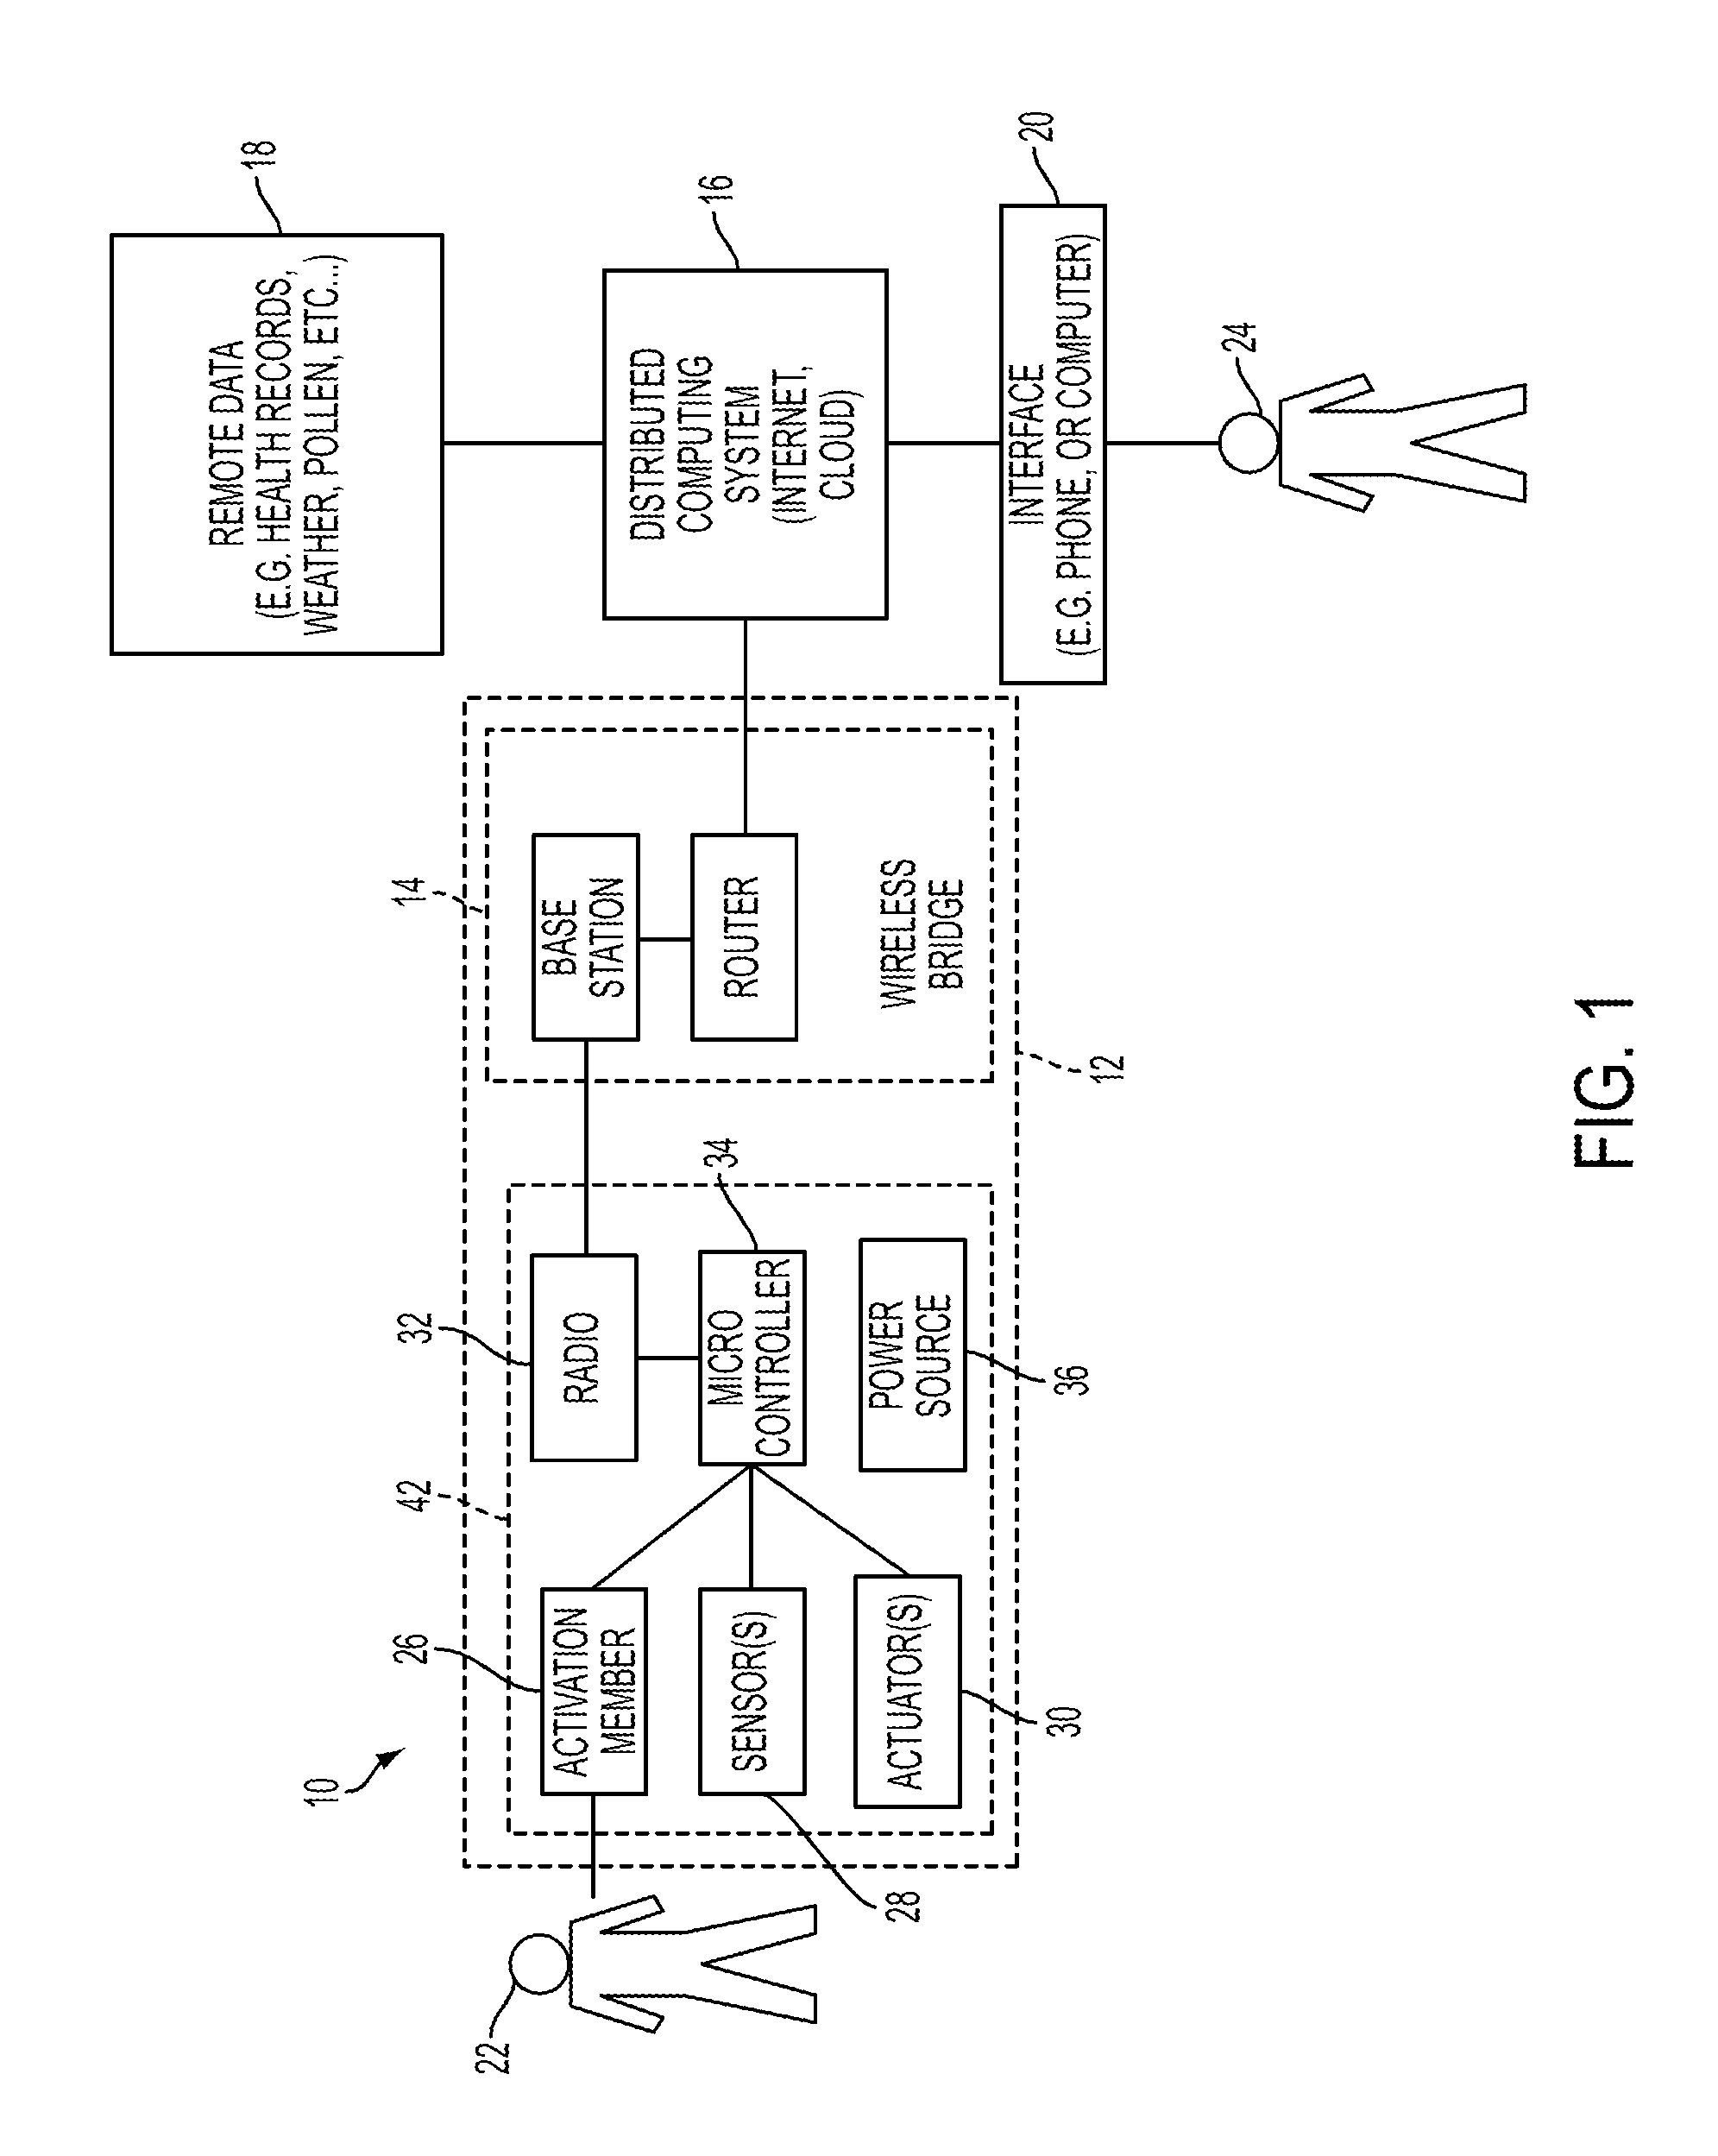 Devices, systems, and methods for adherence monitoring and devices, systems, and methods for monitoring use of consumable dispensers